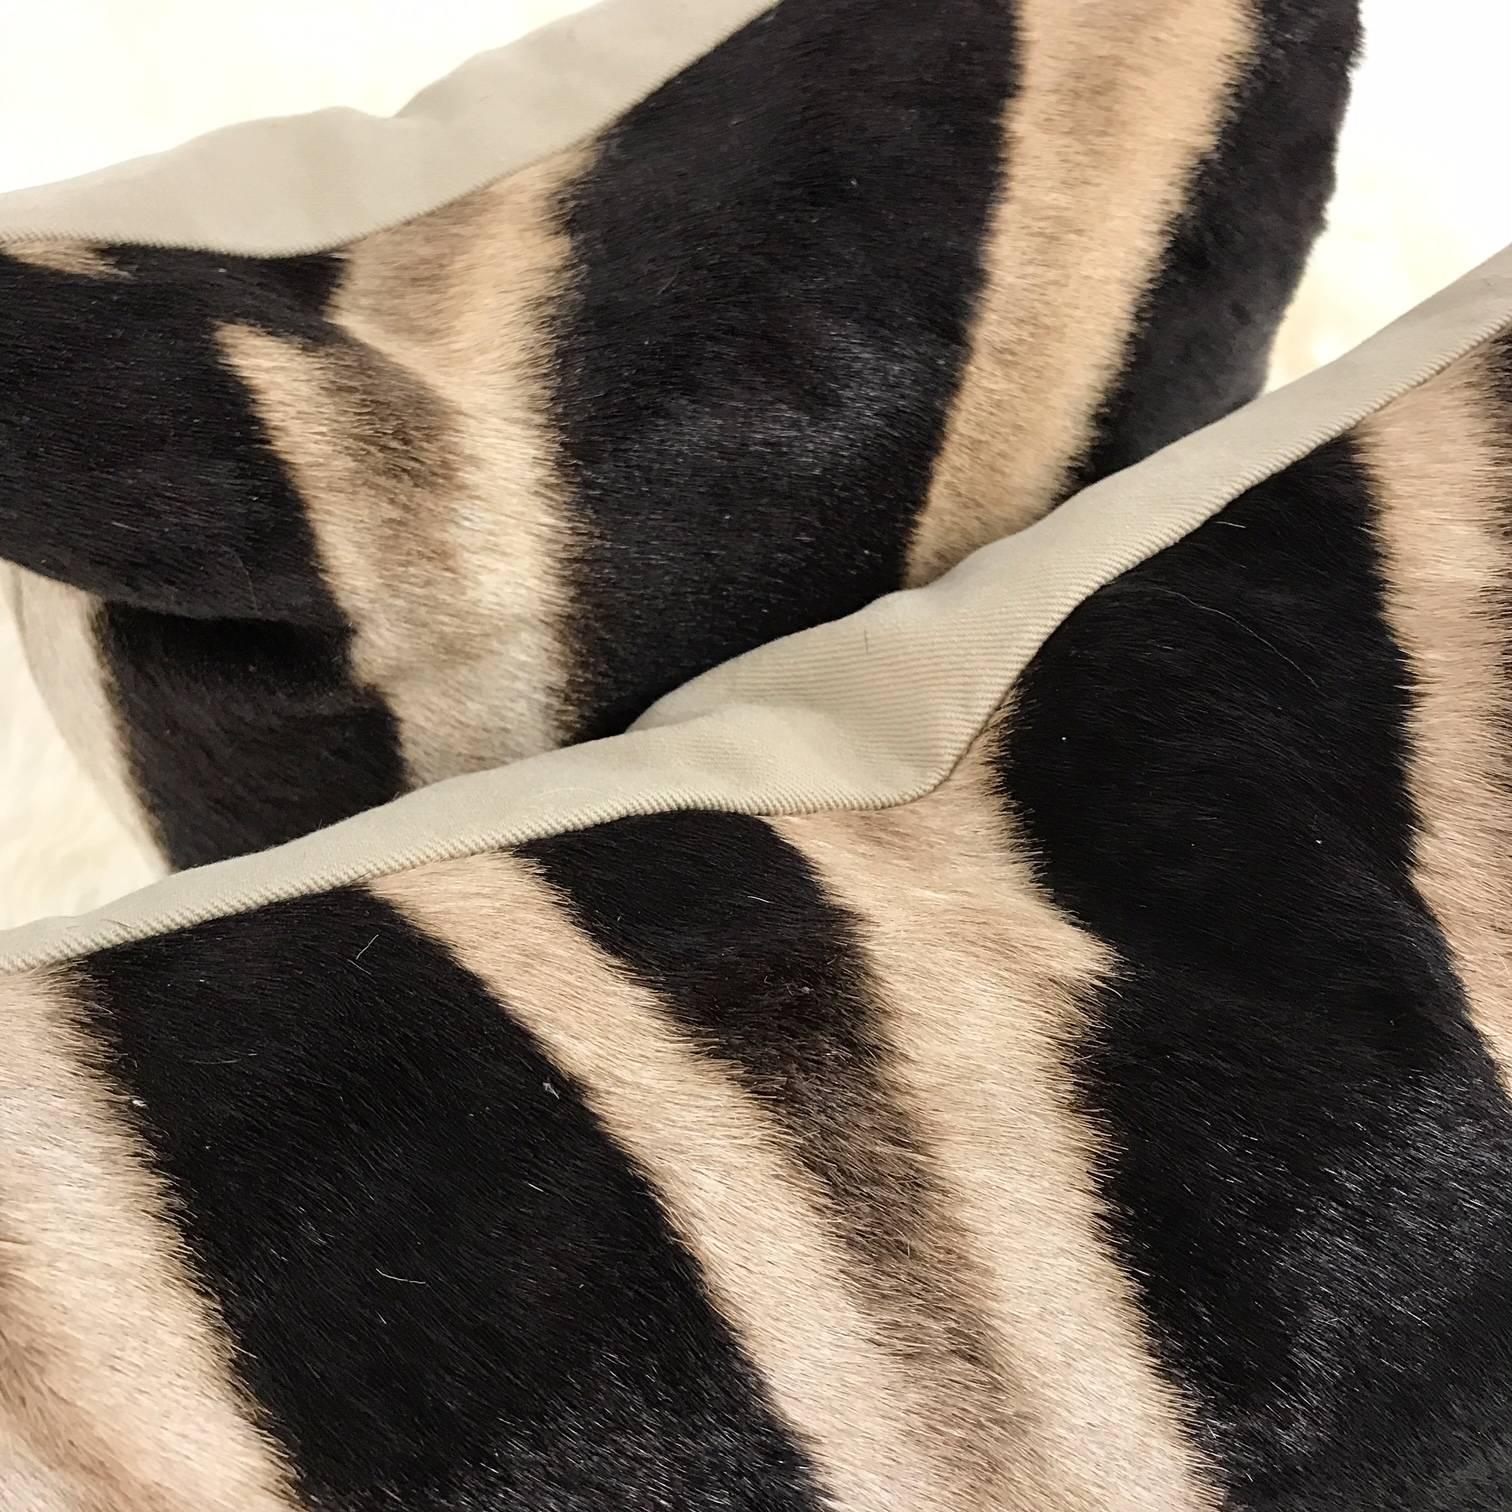 Forsyth zebra hide pillows are simply the best. The most beautiful hides are selected and hand cut, hand-stitched and hand stuffed with the finest goose down. Each step is meticulously curated by Saint Louis based Forsyth artisans. Every pillow is a